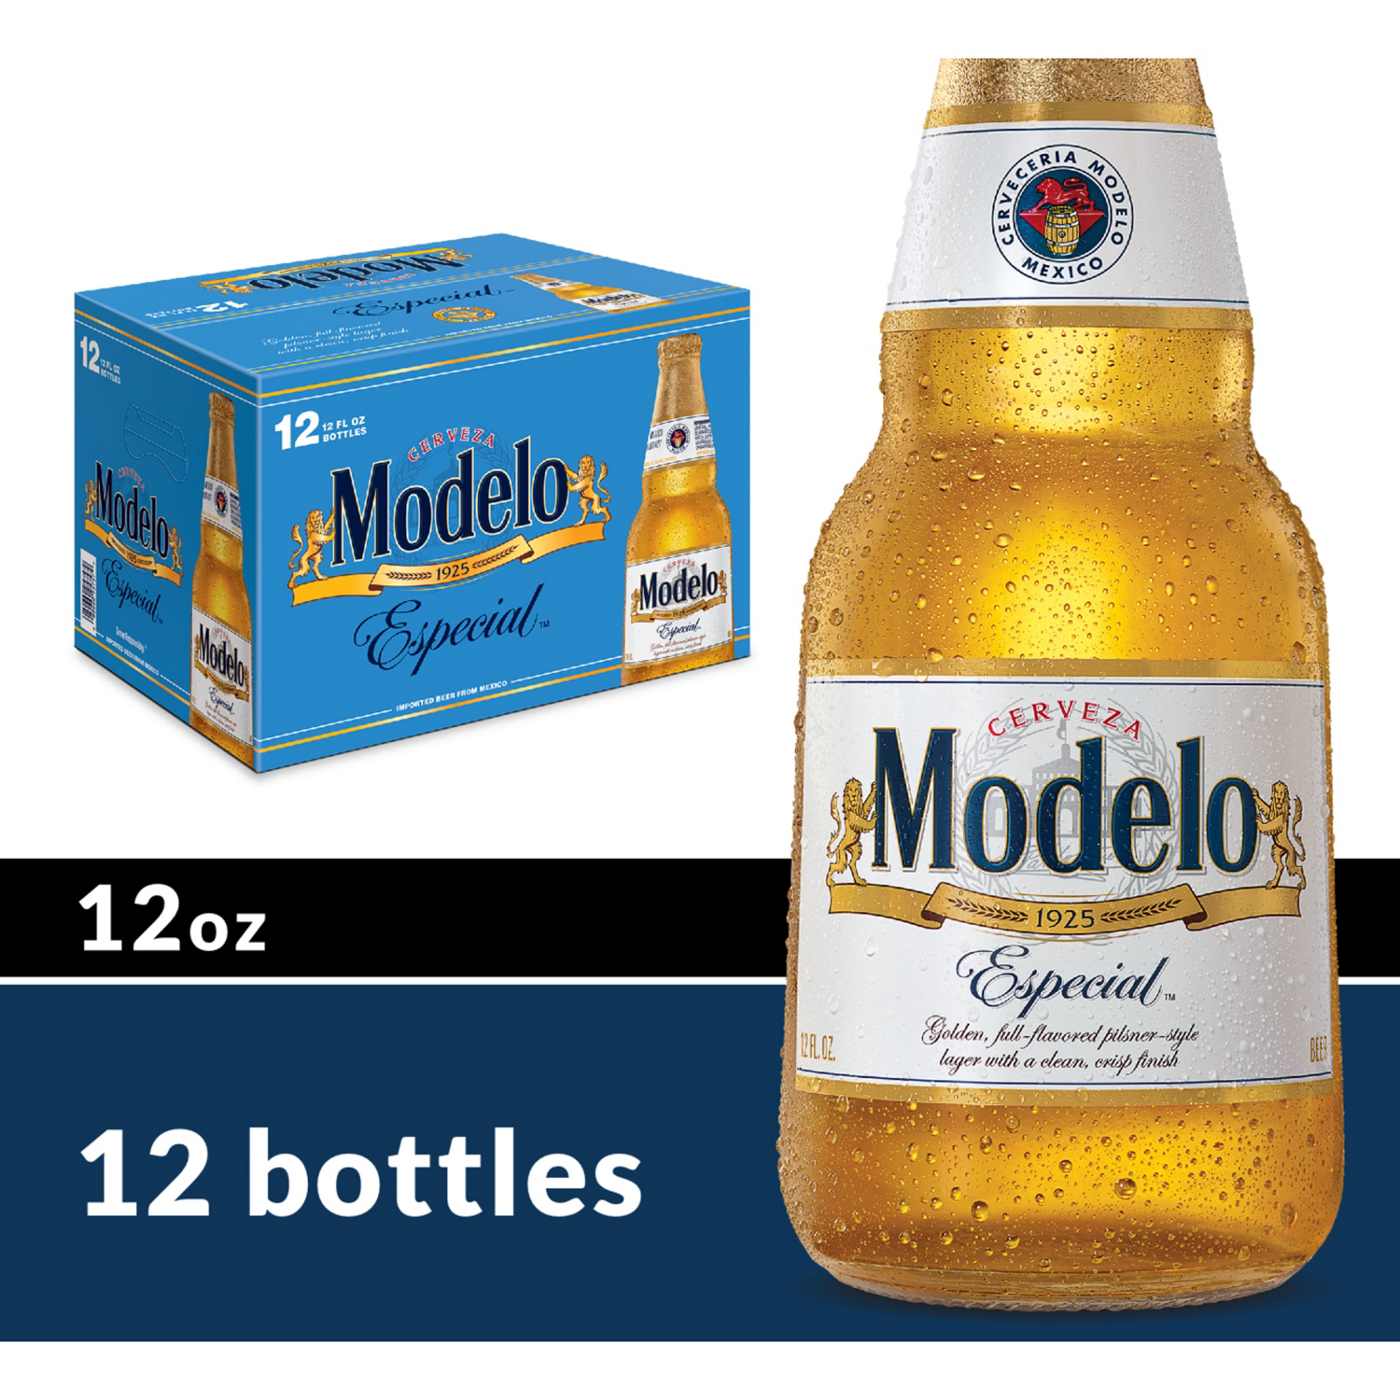 Modelo Especial Mexican Lager Import Beer 12 oz Bottles, 12 pk; image 3 of 10